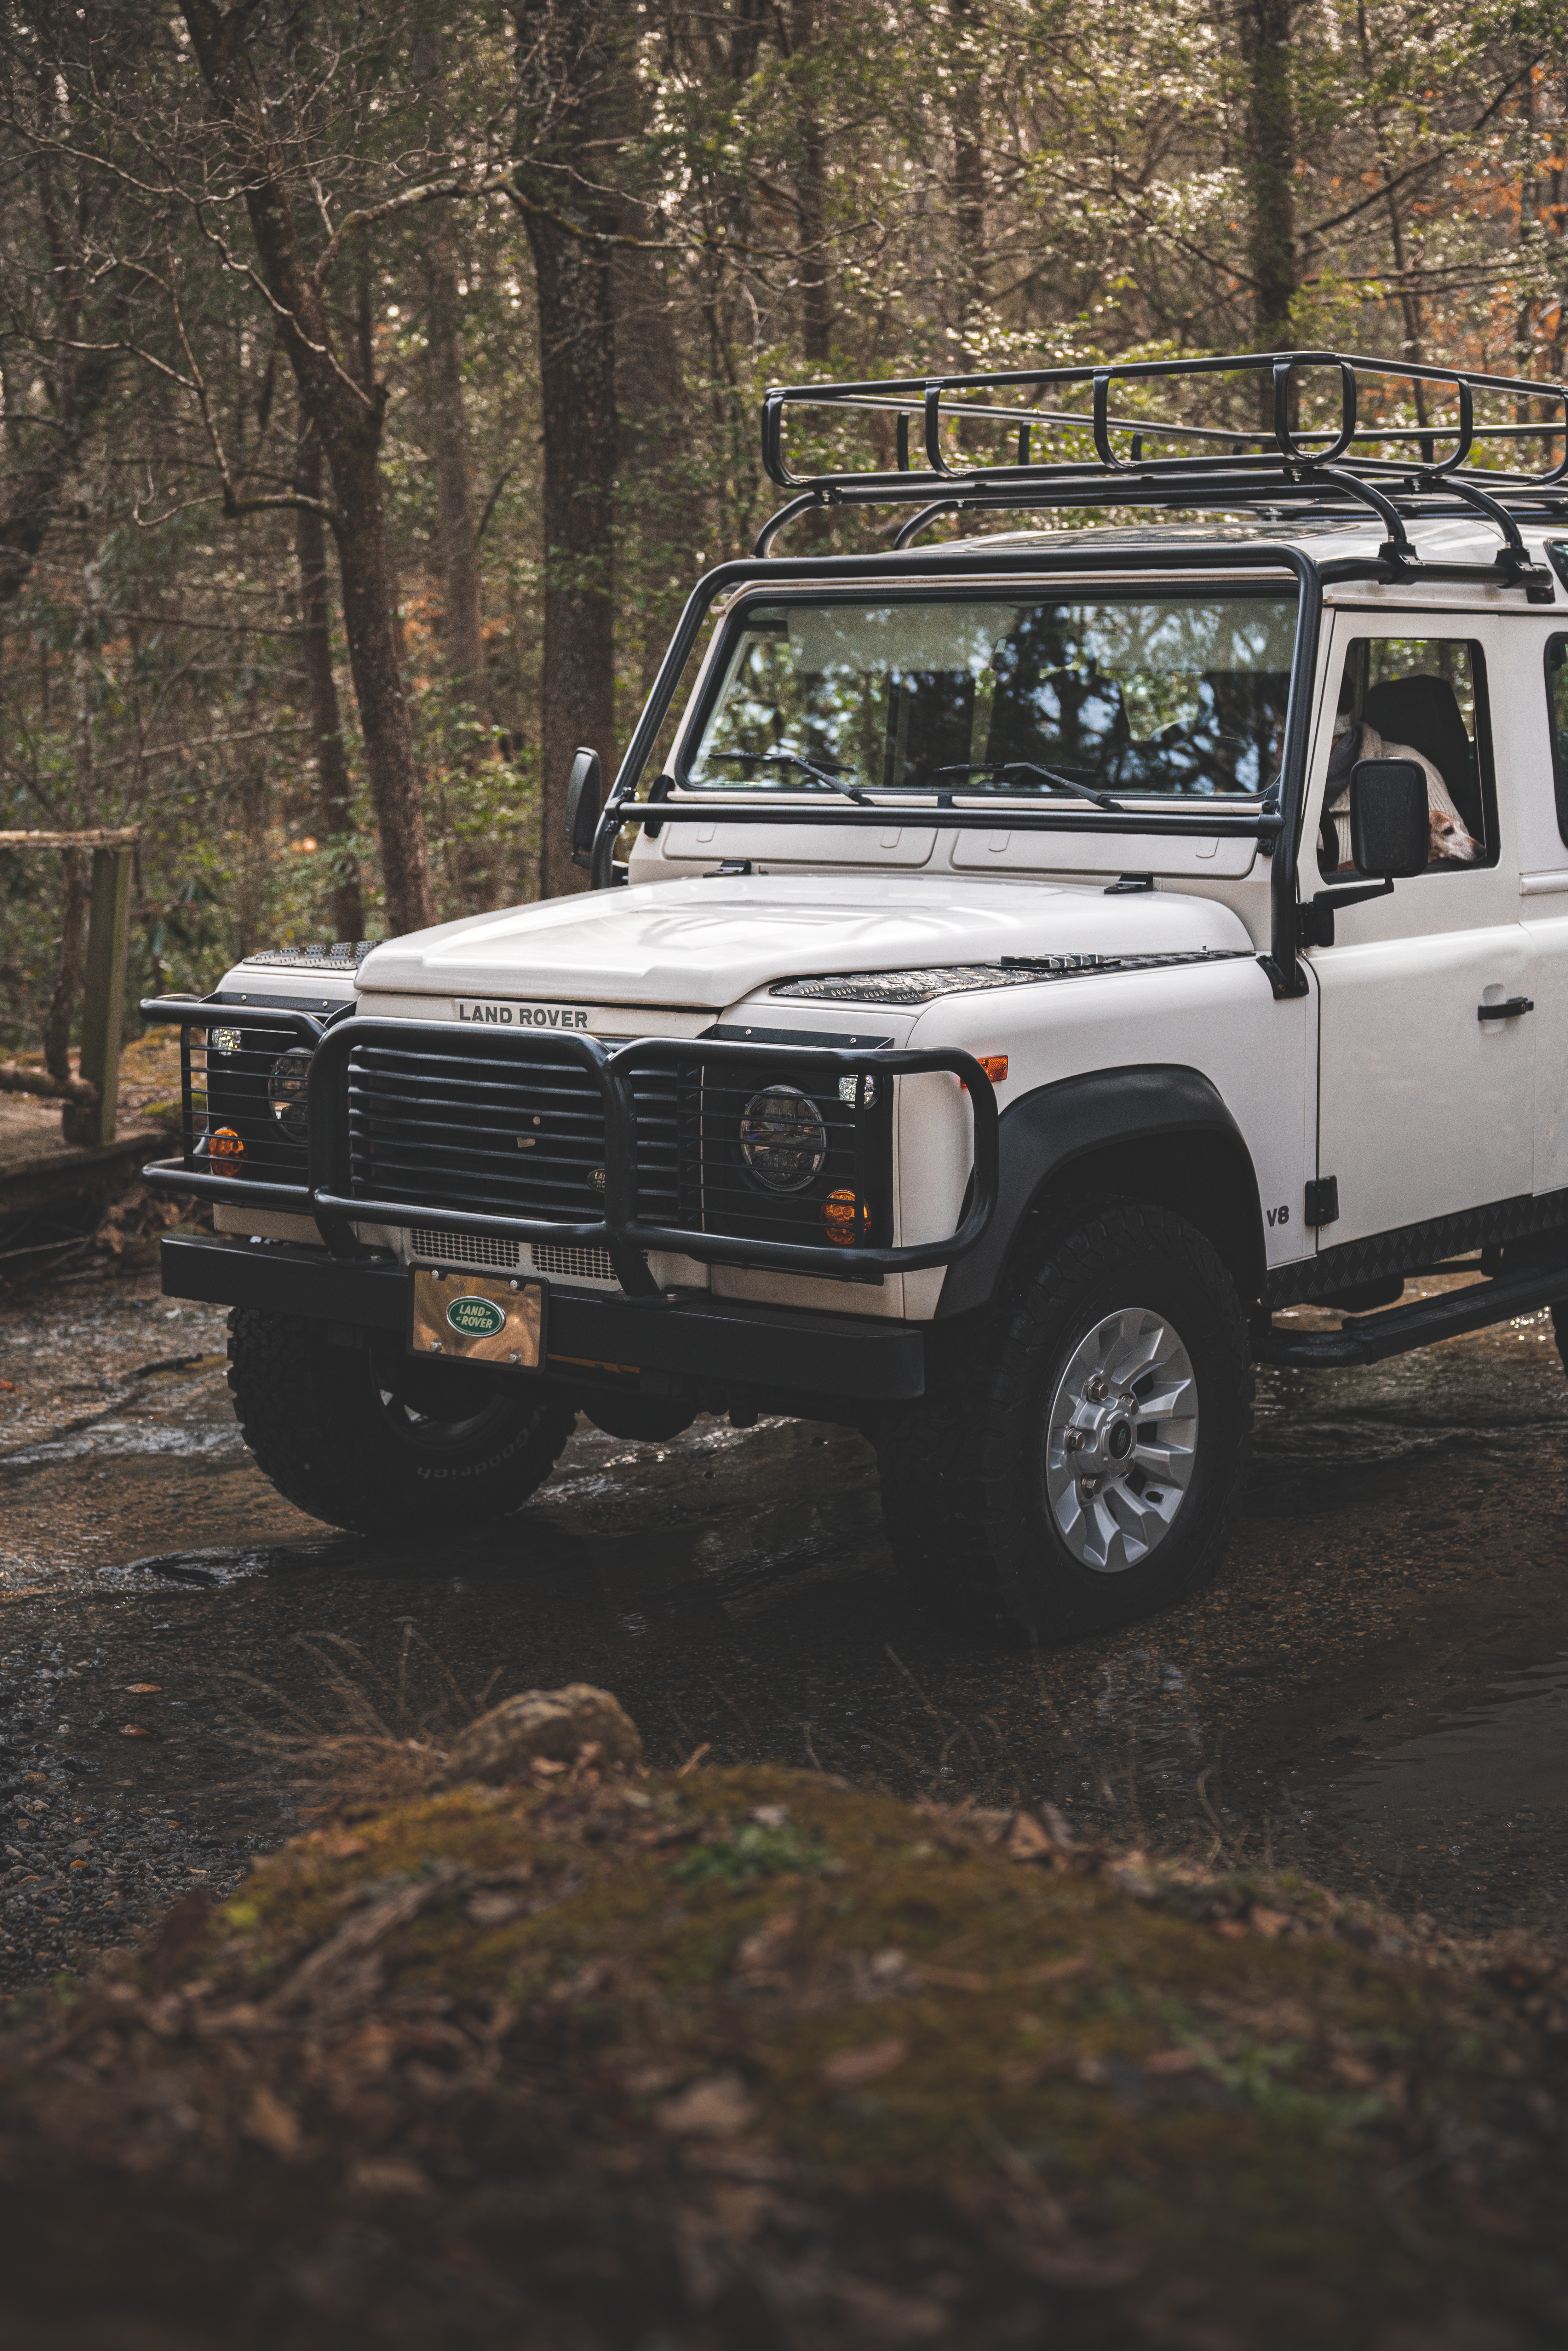 land rover defender, land rover, machine, cars, white, car, suv, jeep